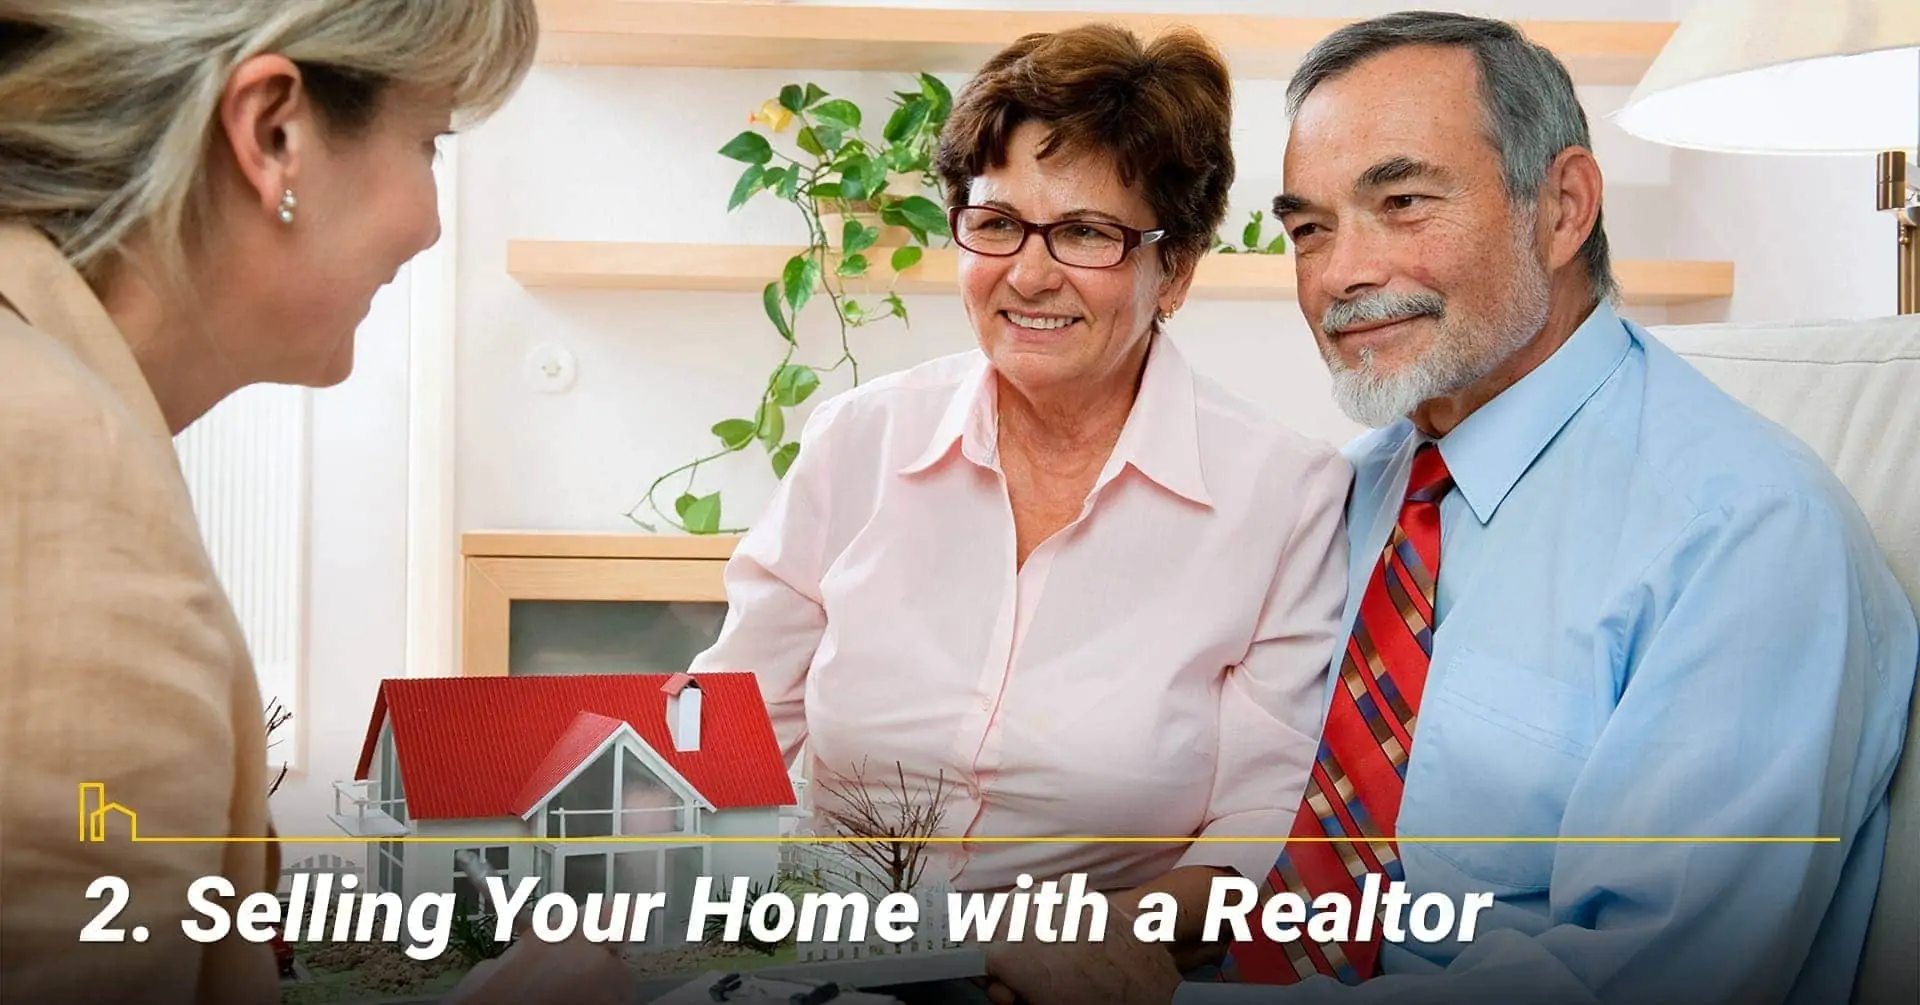 Selling Your Home with a Realtor, work with an agent to sell your home